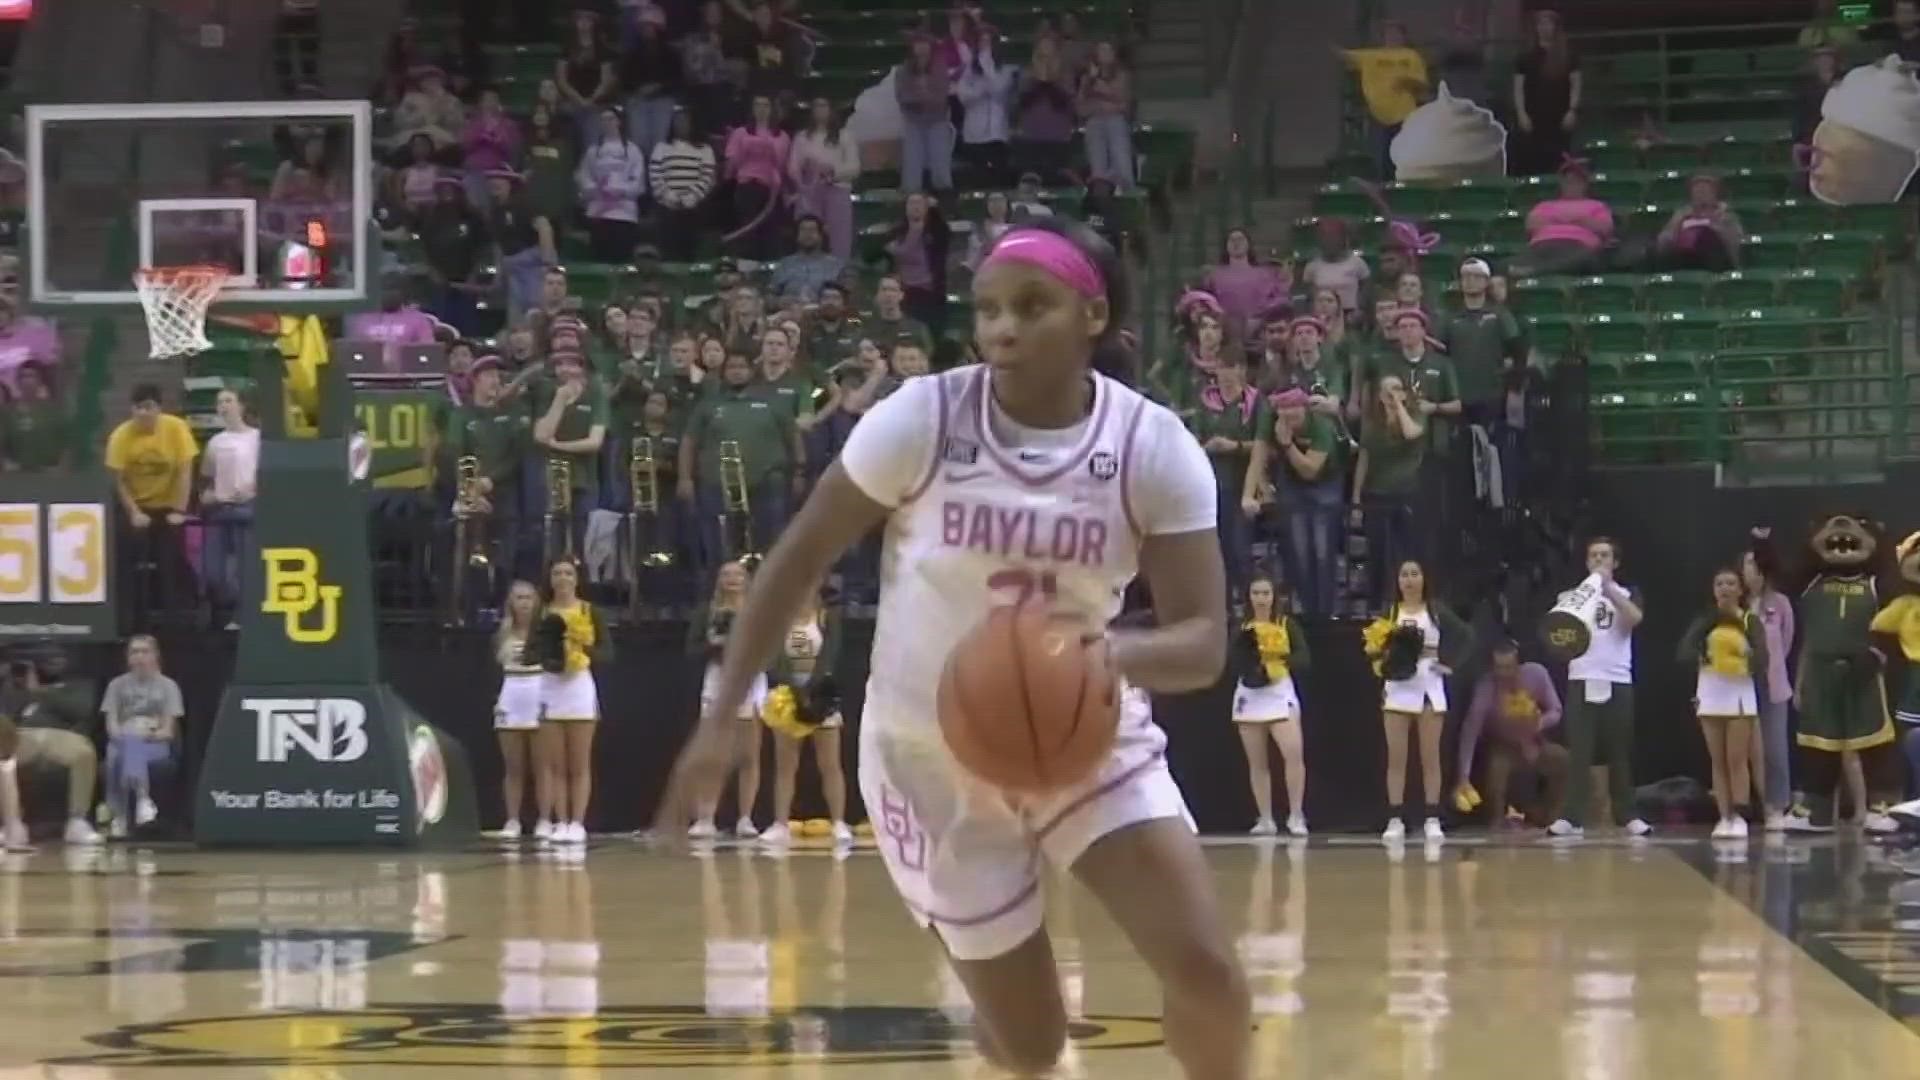 Baylor will look to get back on track against TCU on Wednesday, Feb. 22 in Fort Worth.